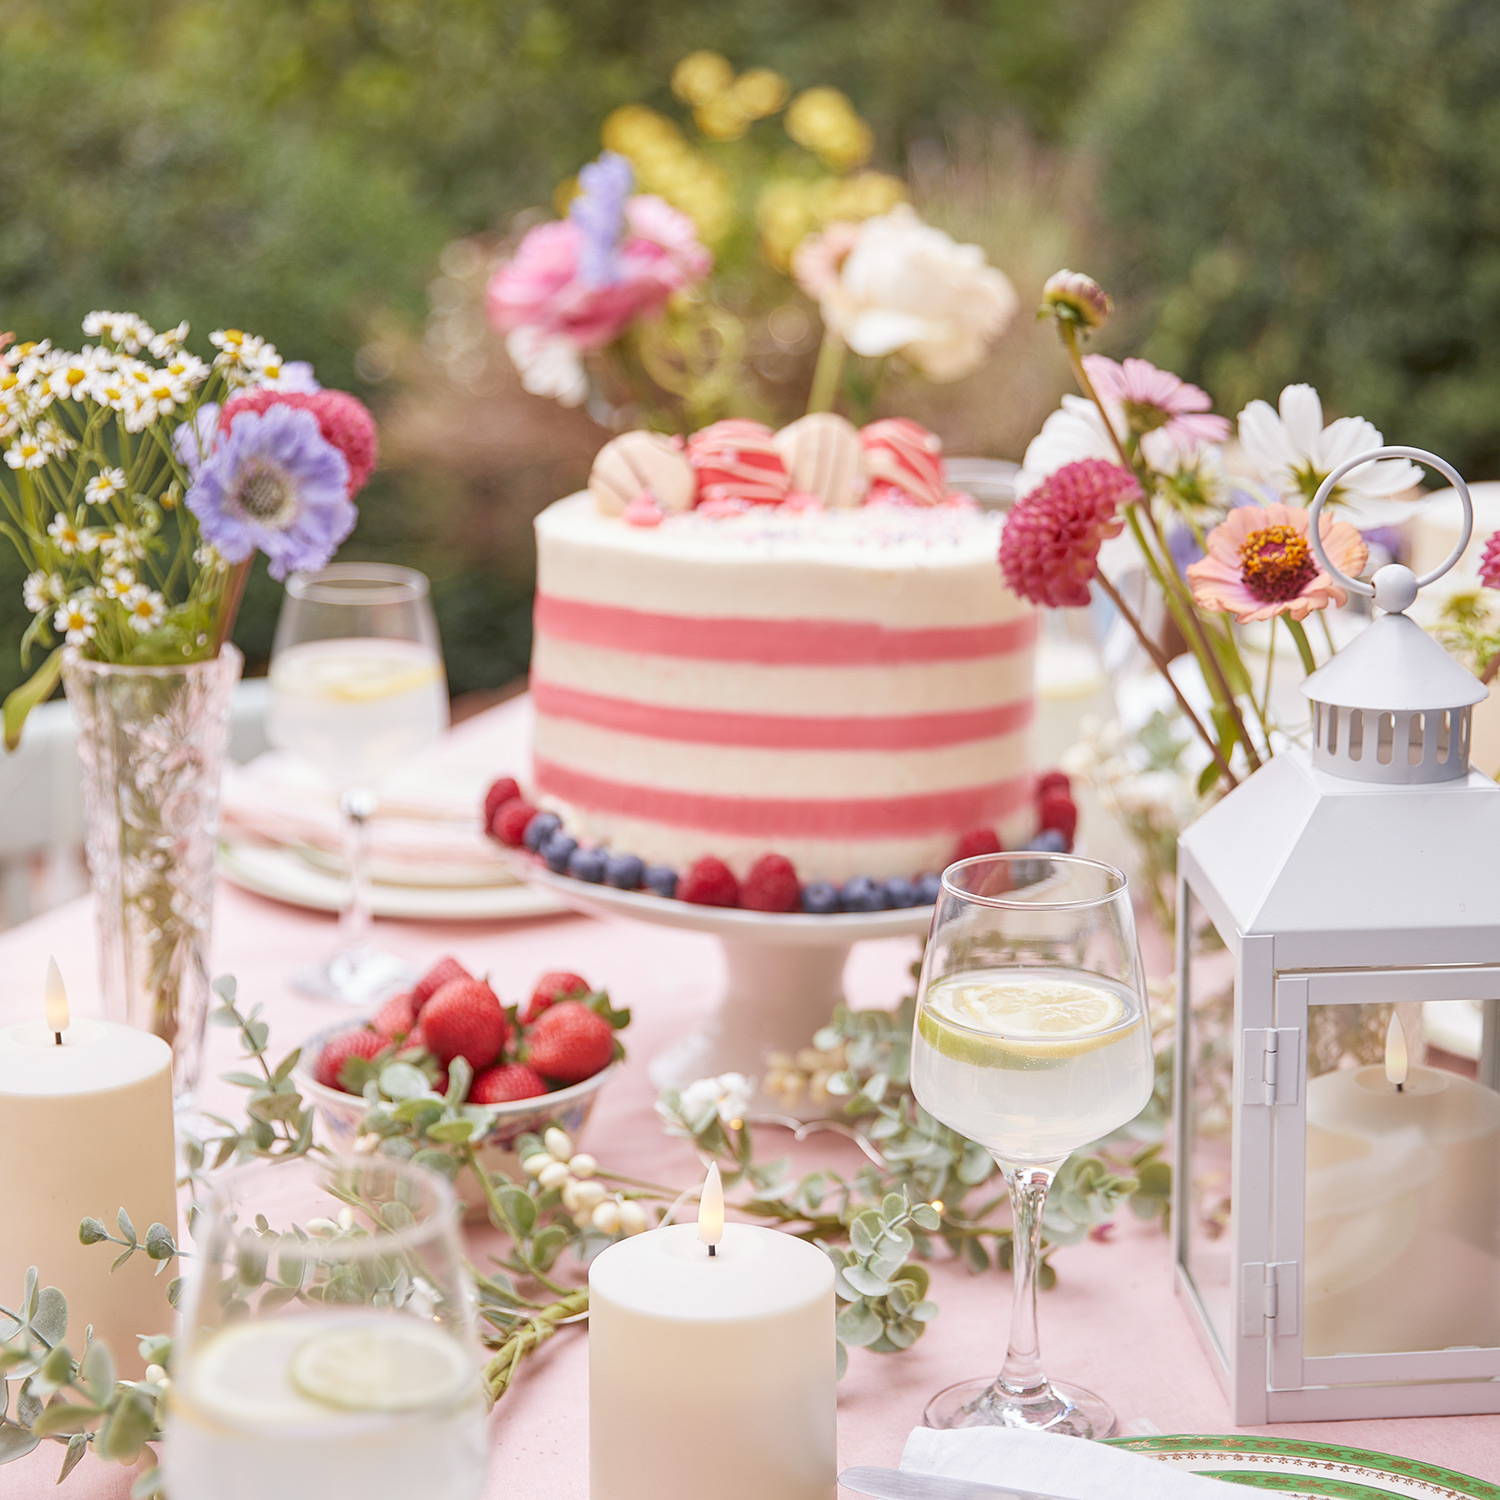 A close up of an outdoor dining table with cakes, sweet treats and LED candles.